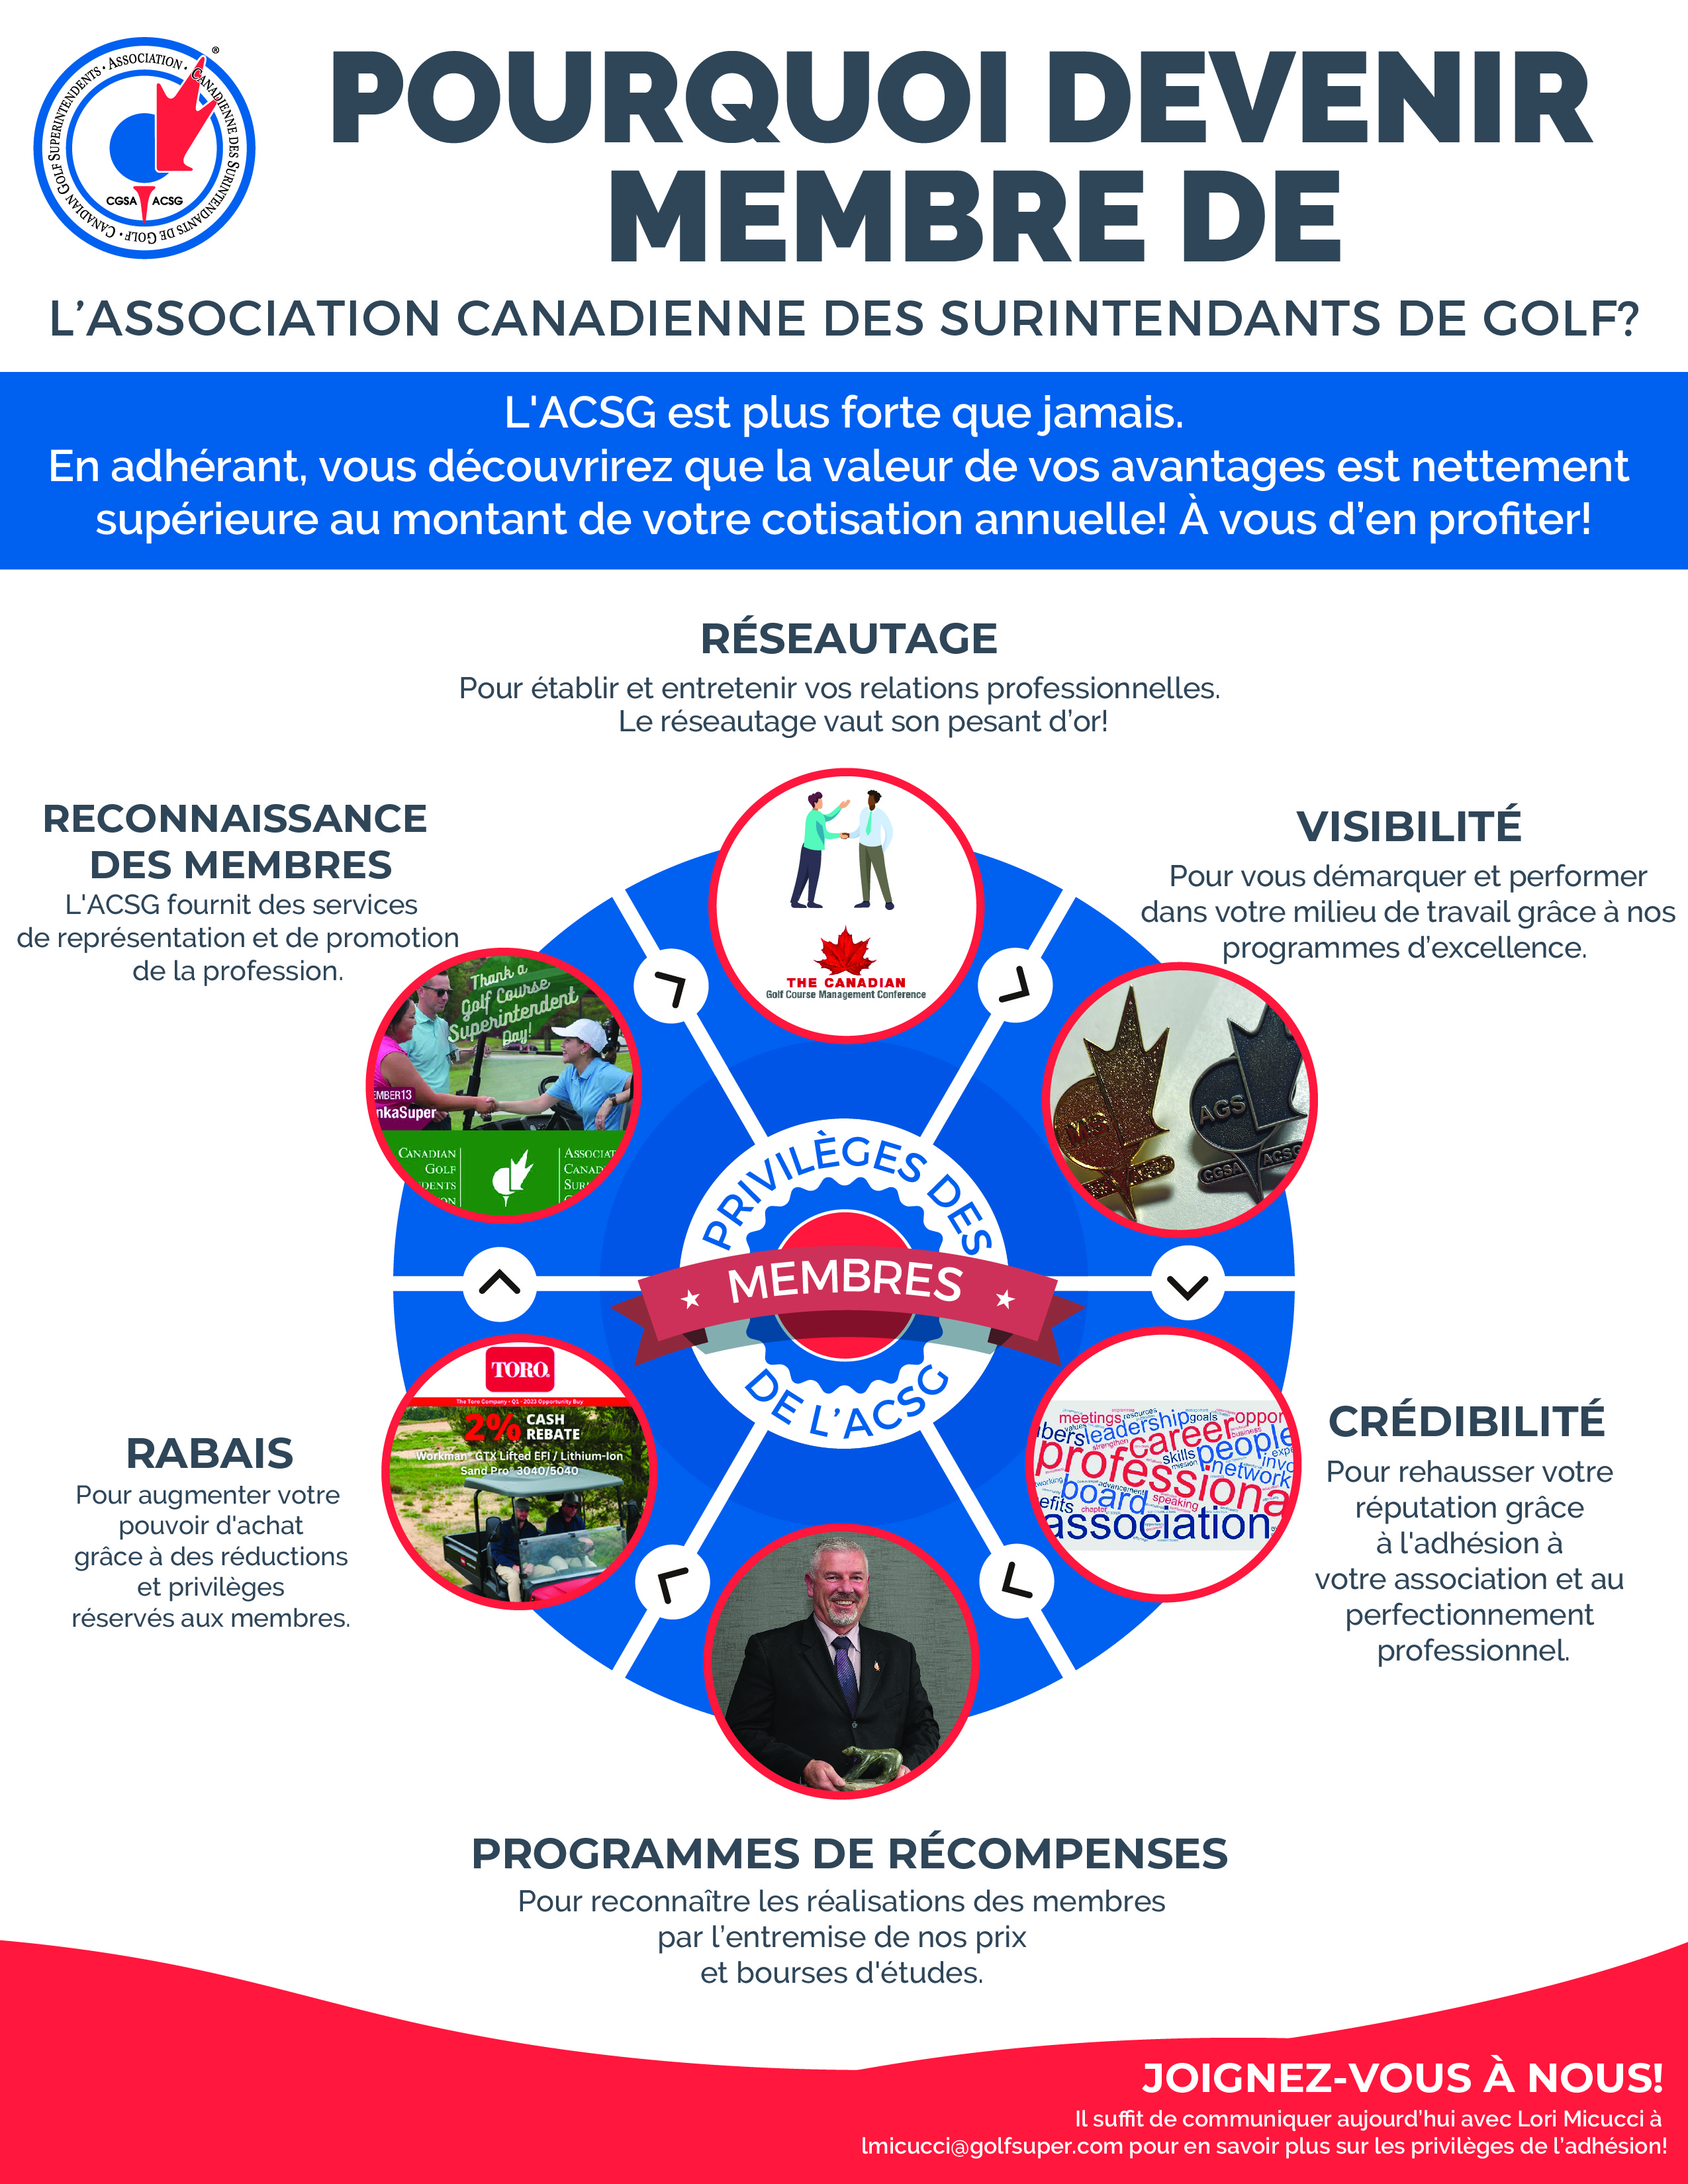 Member_Promo/Why Join in French jpg